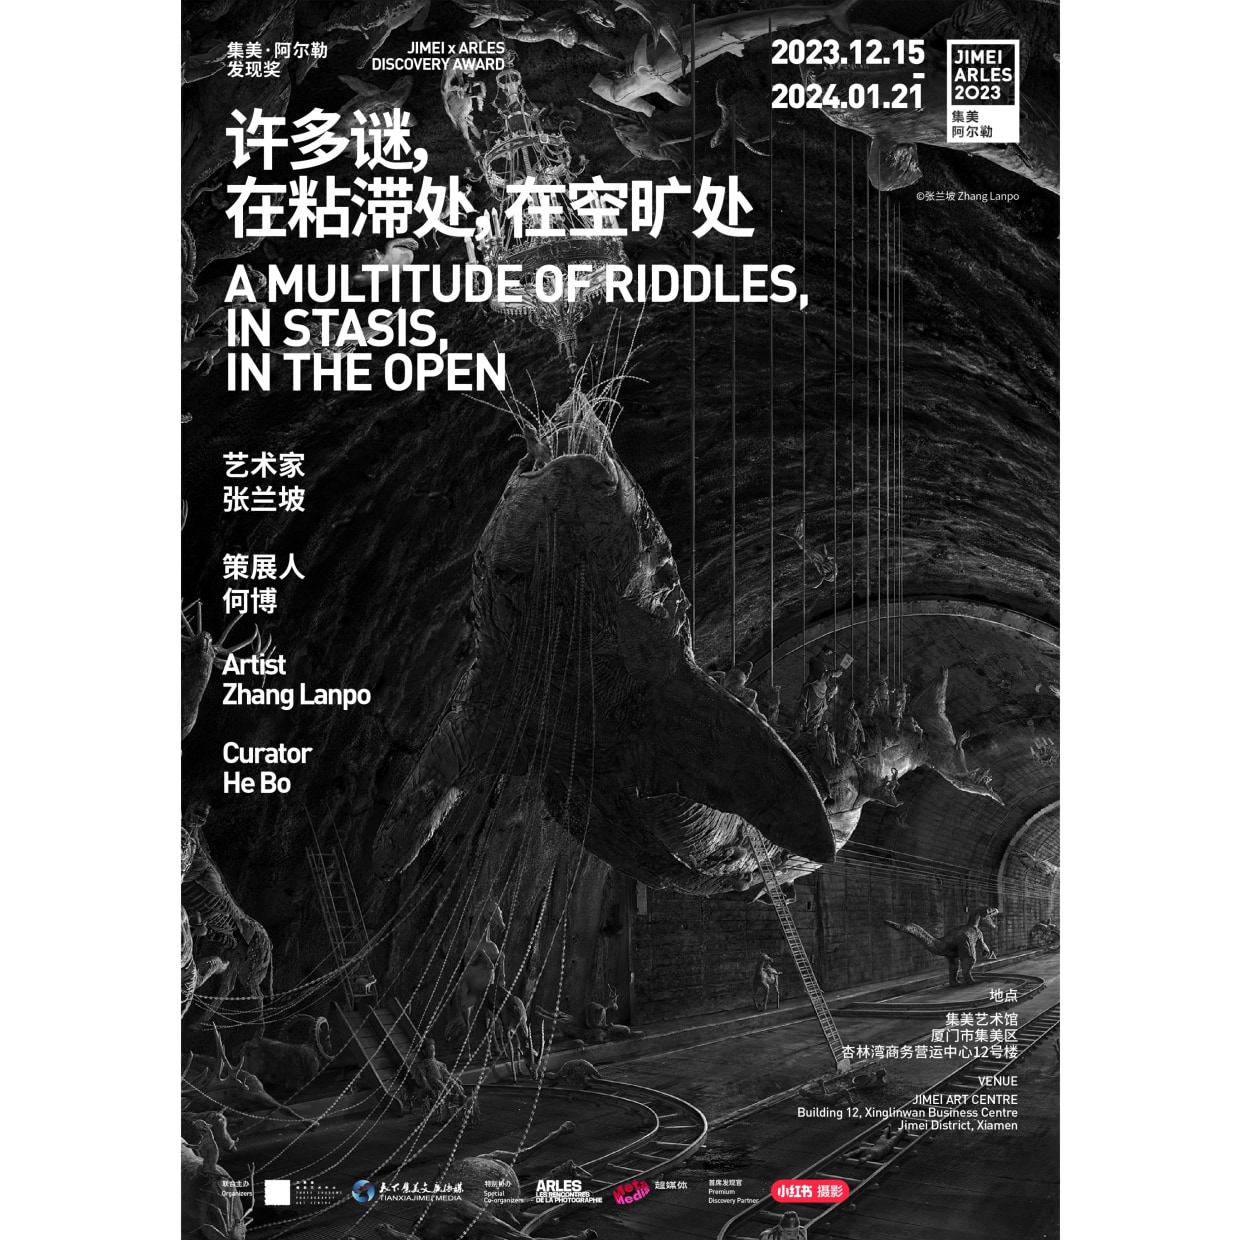 Zhang Lanpo A MULTITUDE OF RIDDLES, IN STASIS, IN THE OPEN The title is drawn from Zhang Lanpo's work Red...